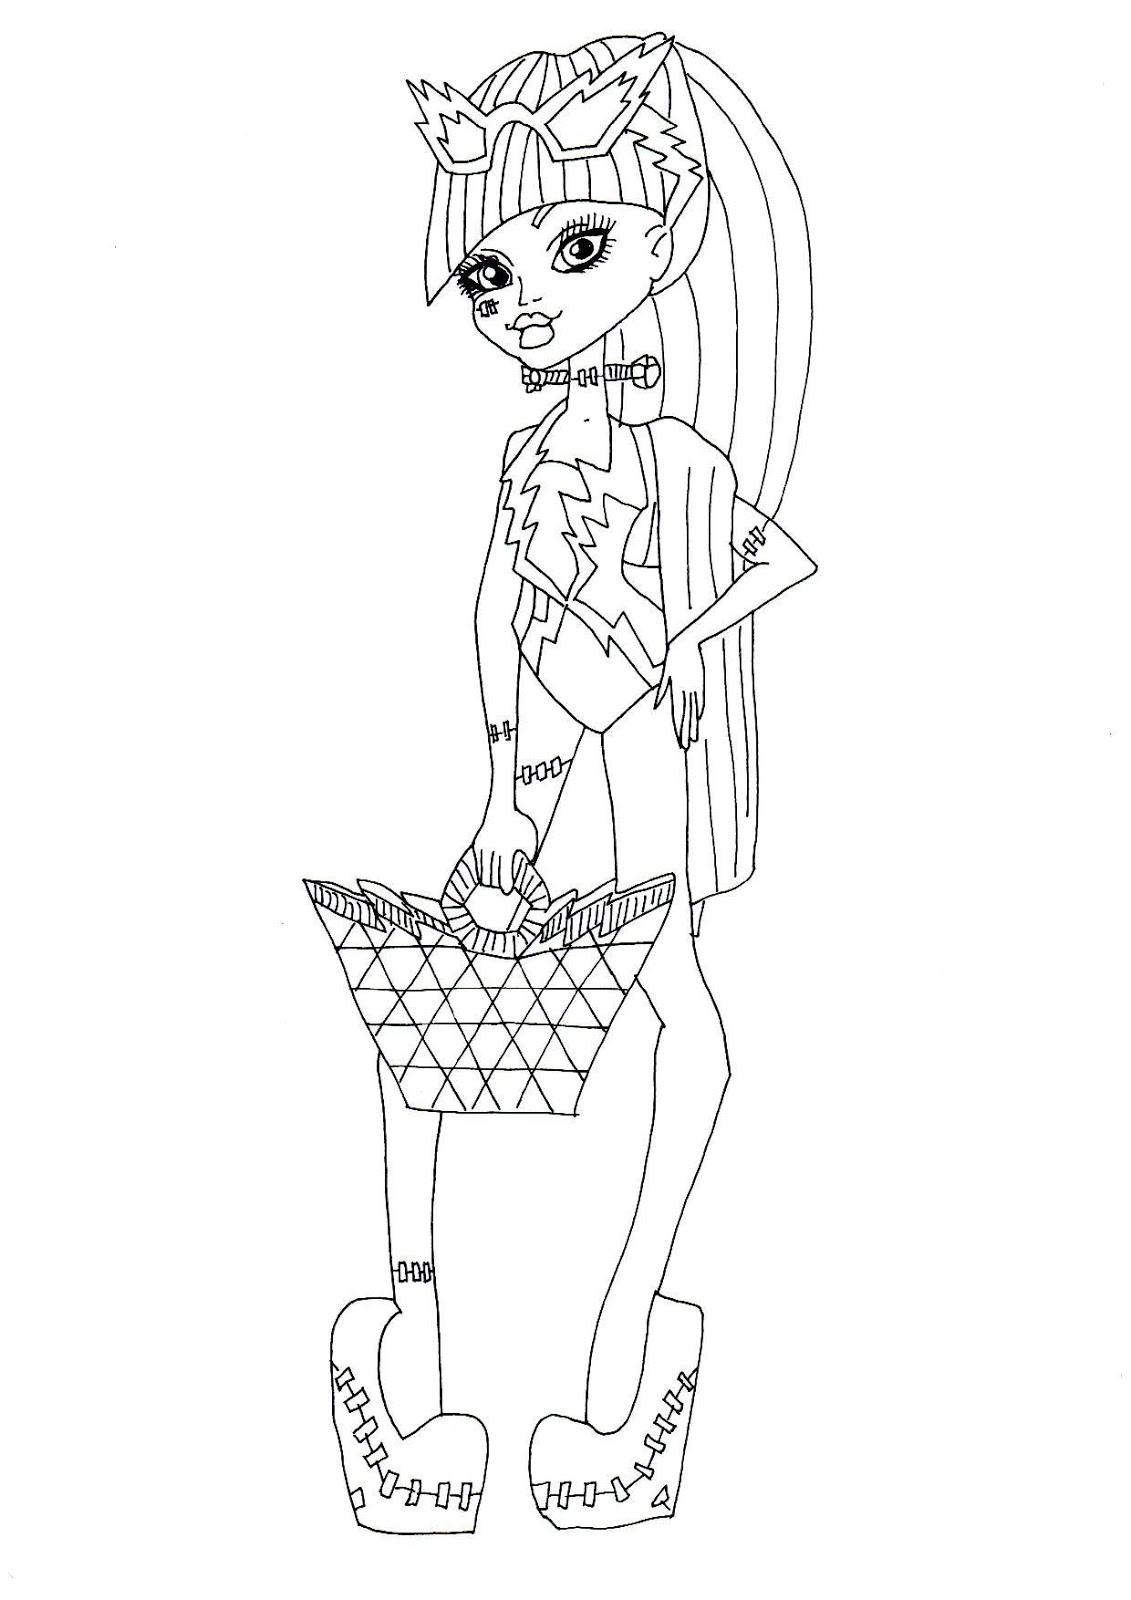 Download Free Printable Monster High Coloring Pages: Frankie Stein Swim Class Coloring Sheet